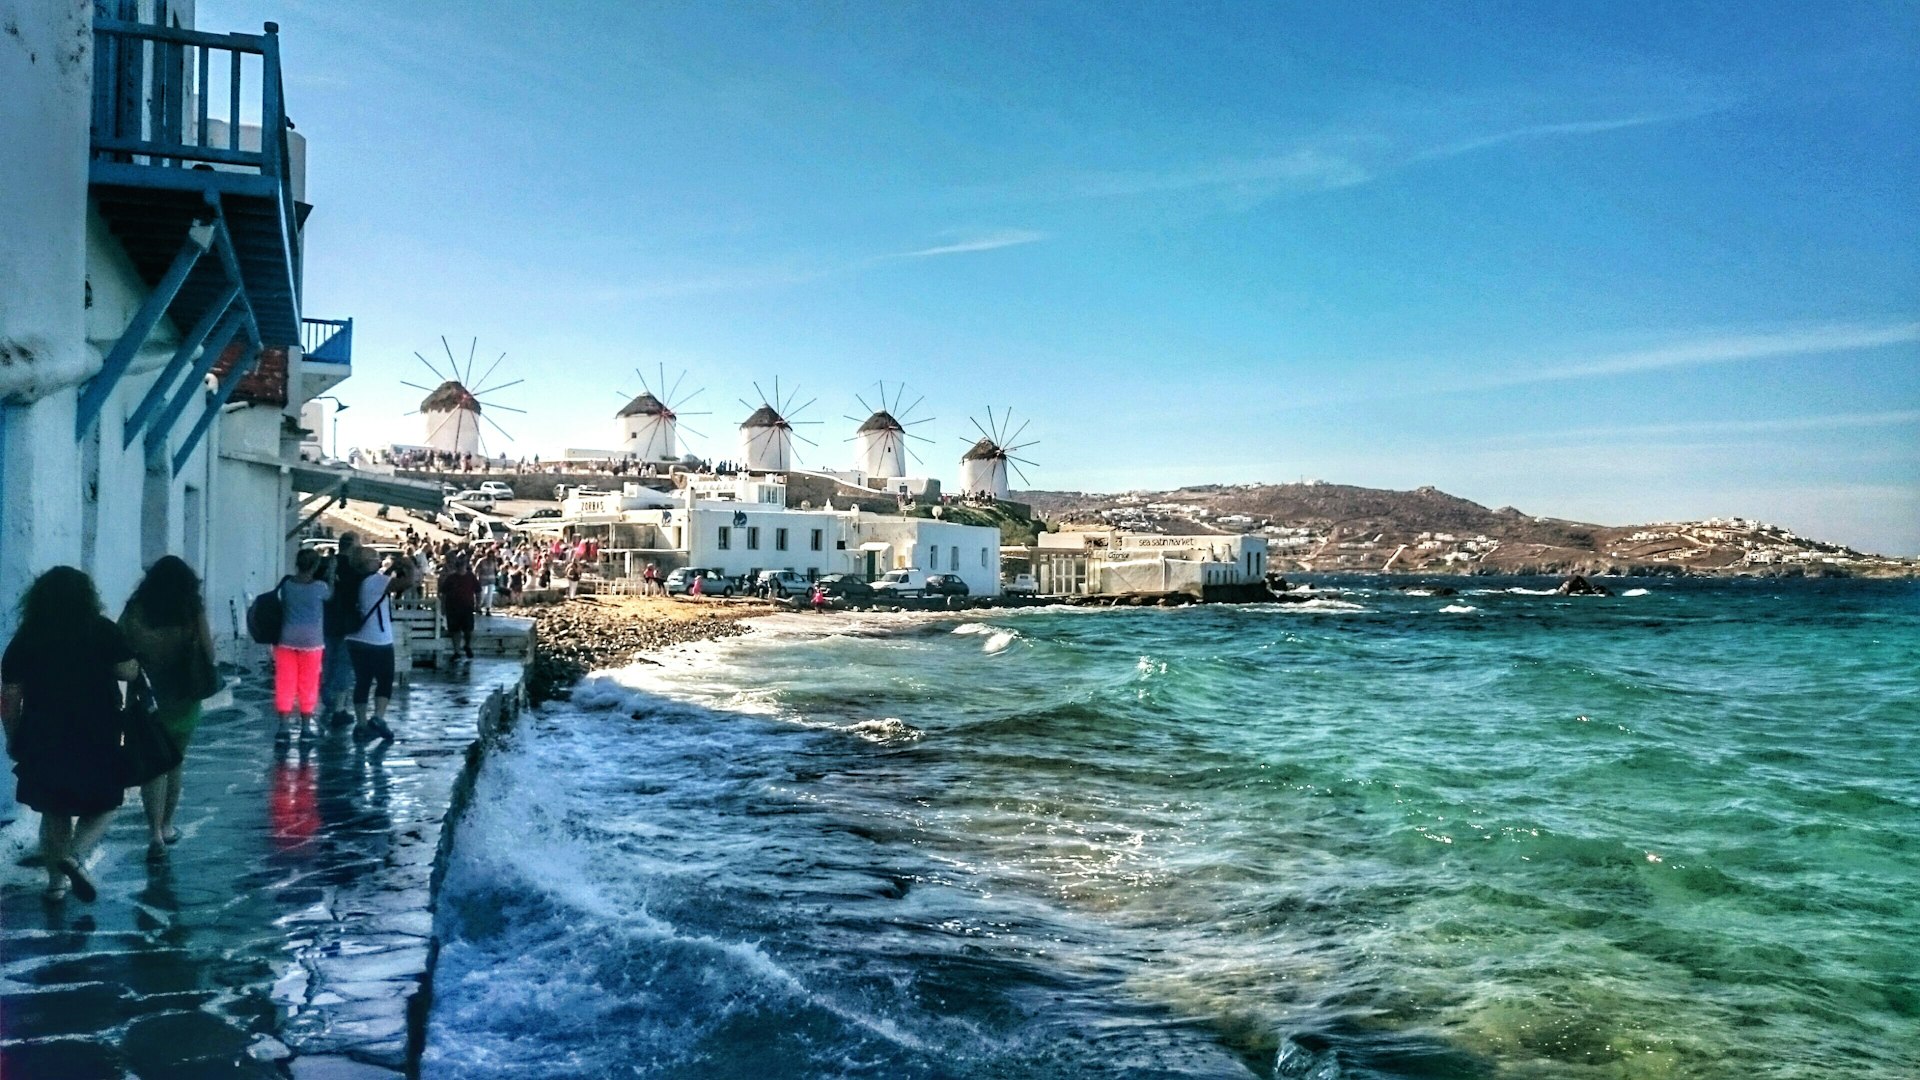 Scenic view of the sea with the famous windmills on the hills in the background in Mykonos